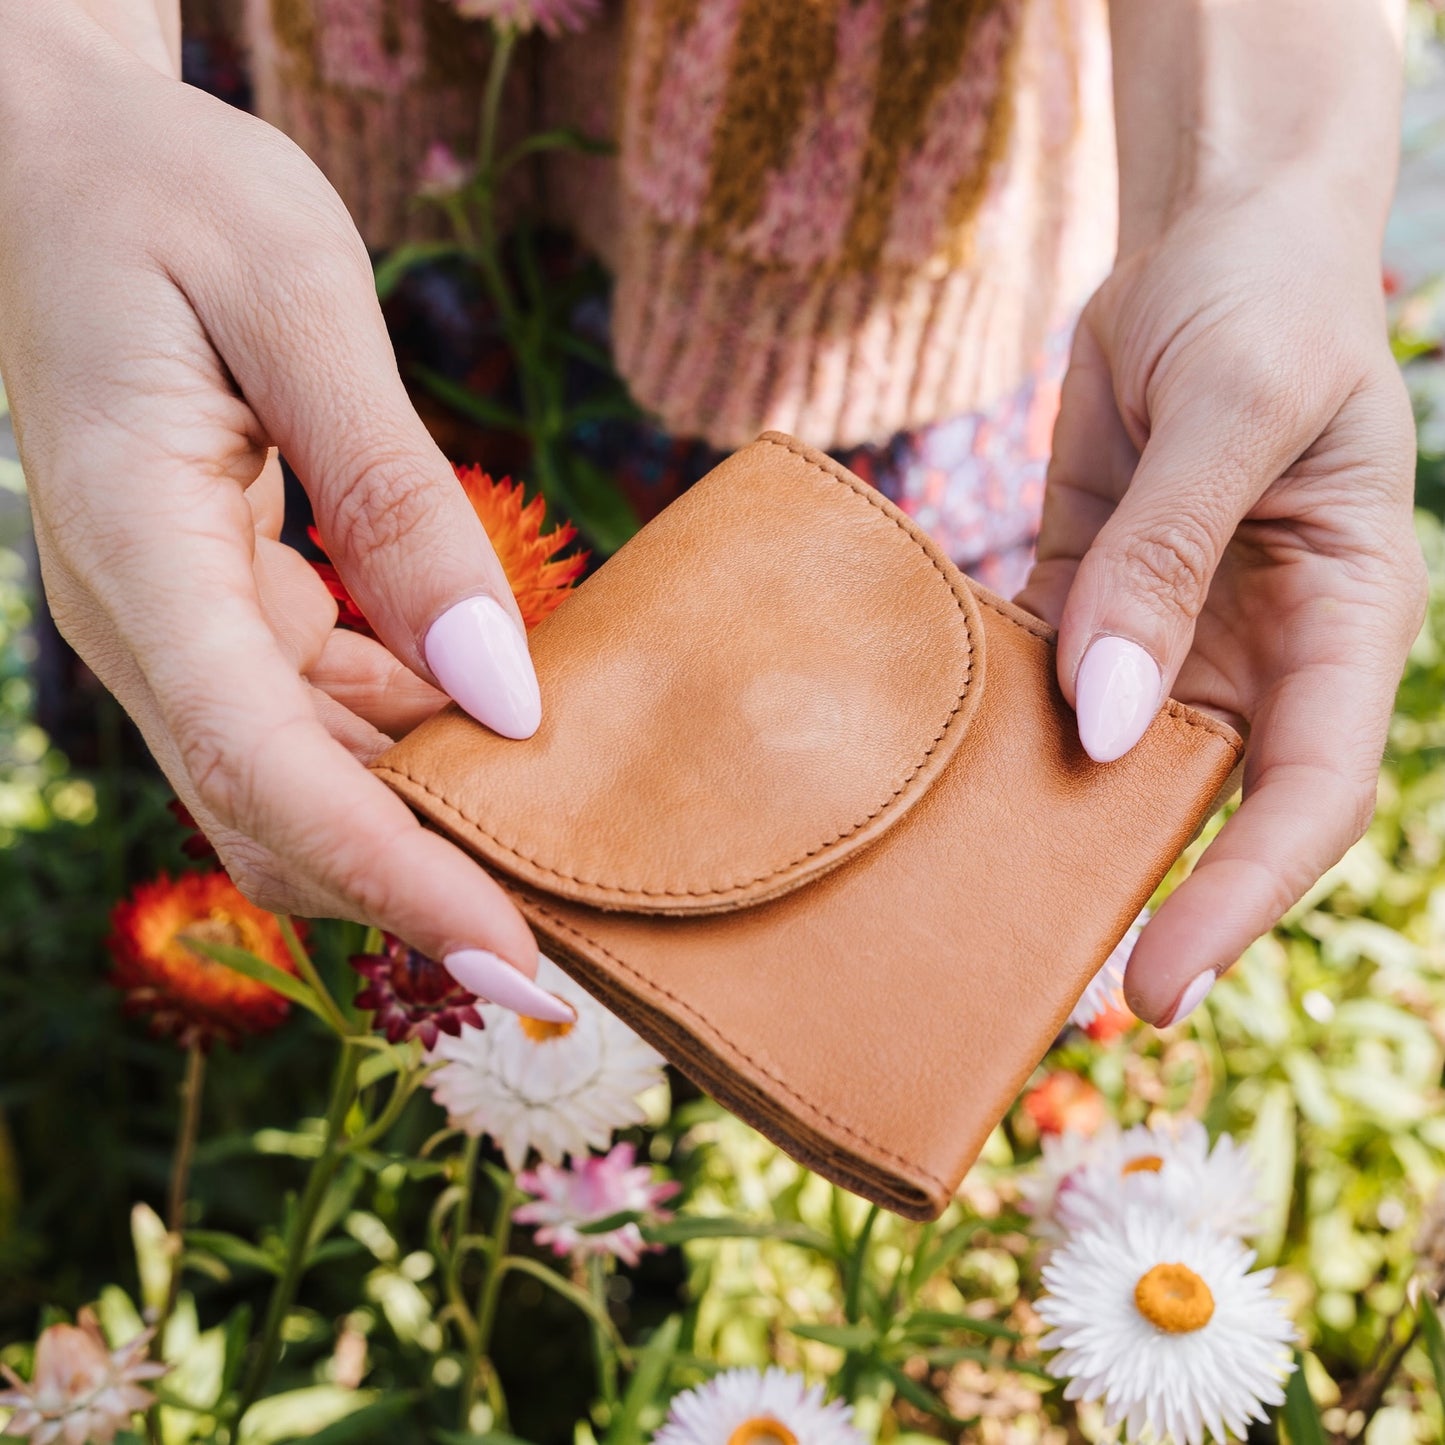 Small, unisex + super functional, our Making Waves purse features: - 3 card slots - a section for notes - coin section with zip closure - small + compact to fit in the pocket of your jeans or clutch  10 x 9.5 x 1 cm 